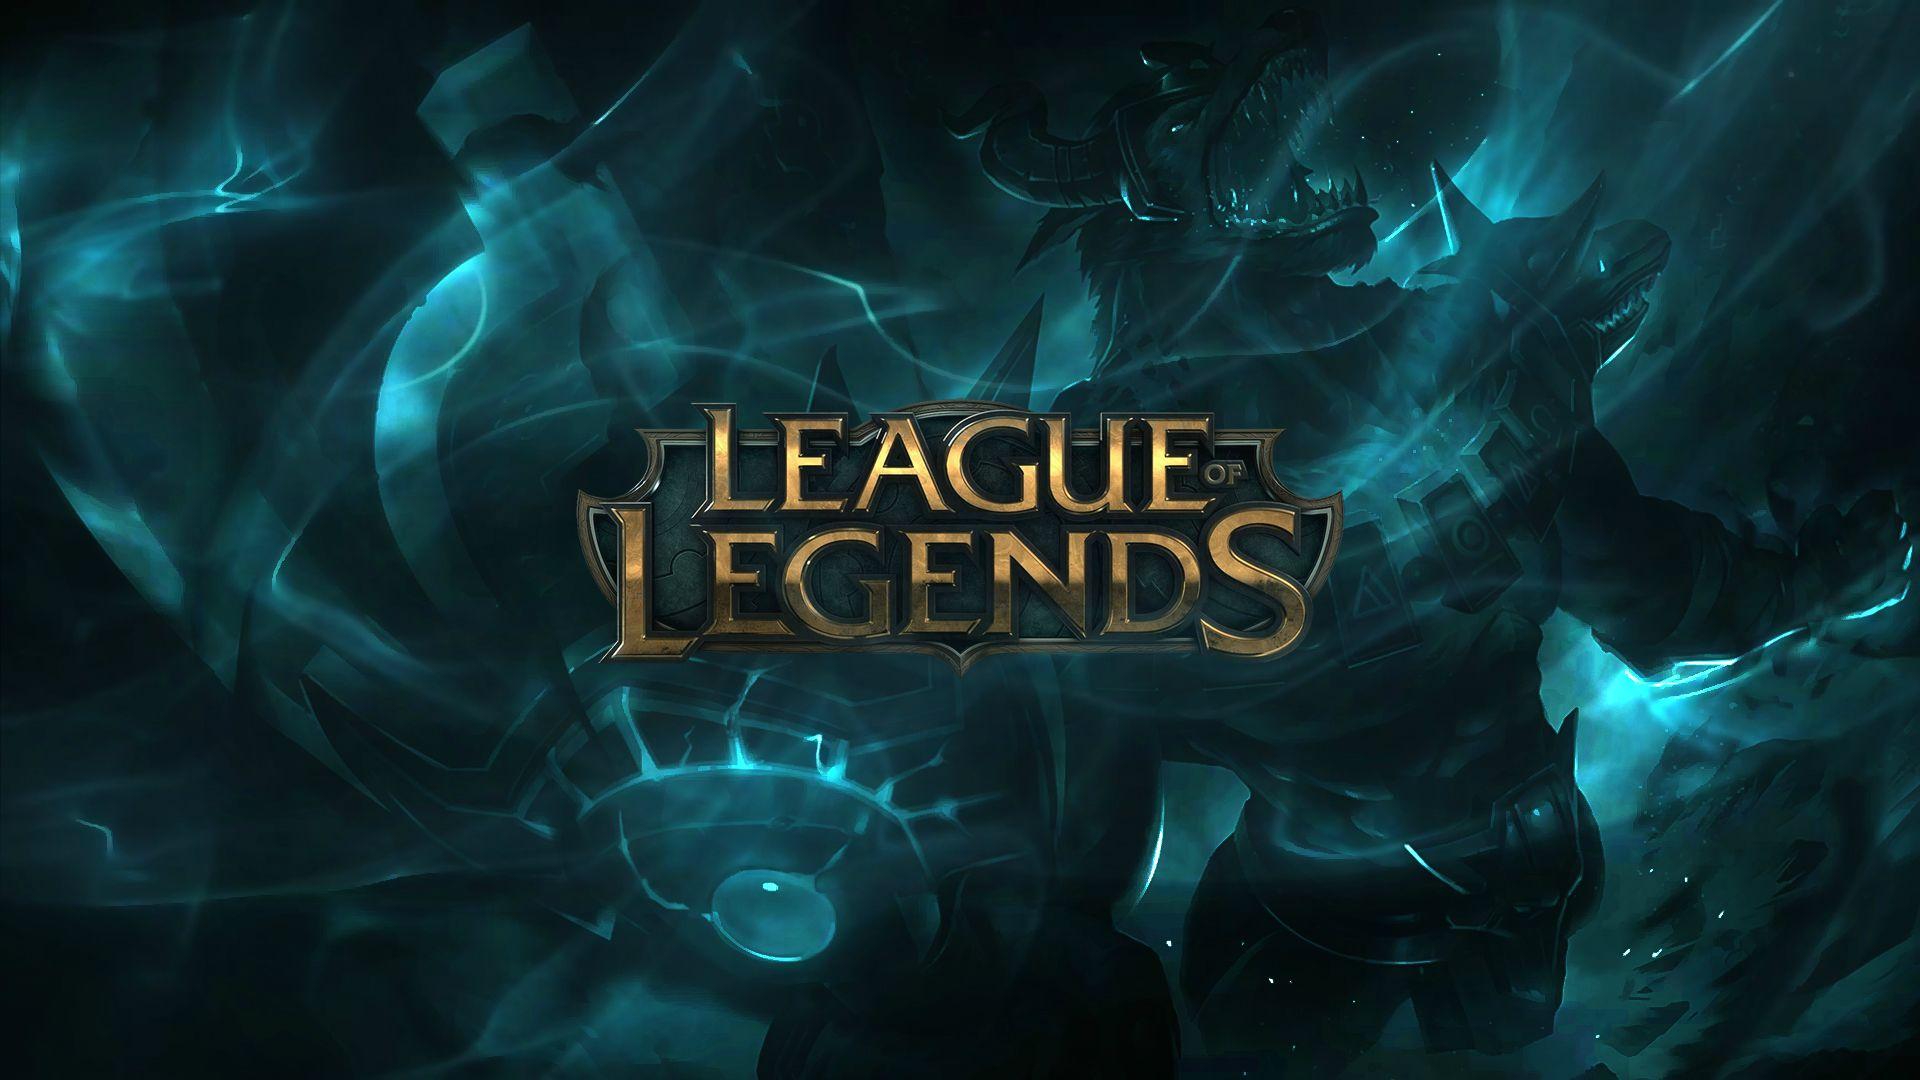 League Of Legends Logo Wallpapers Top Free League Of Legends Logo Backgrounds Wallpaperaccess